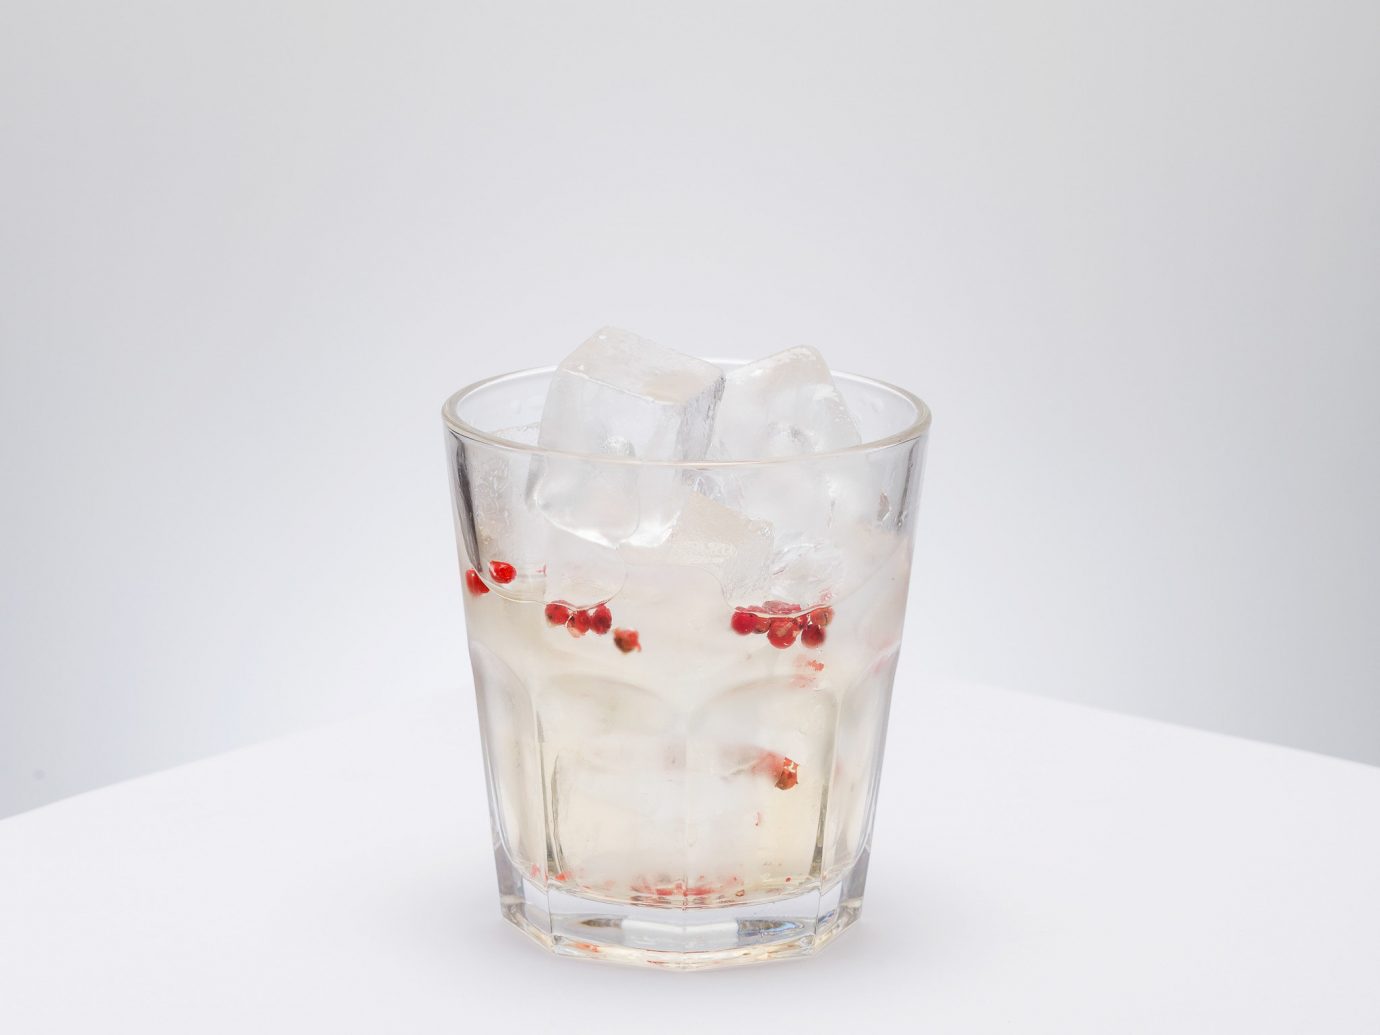 Offbeat Trip Ideas cup white Drink old fashioned glass glass highball glass tumbler beverage